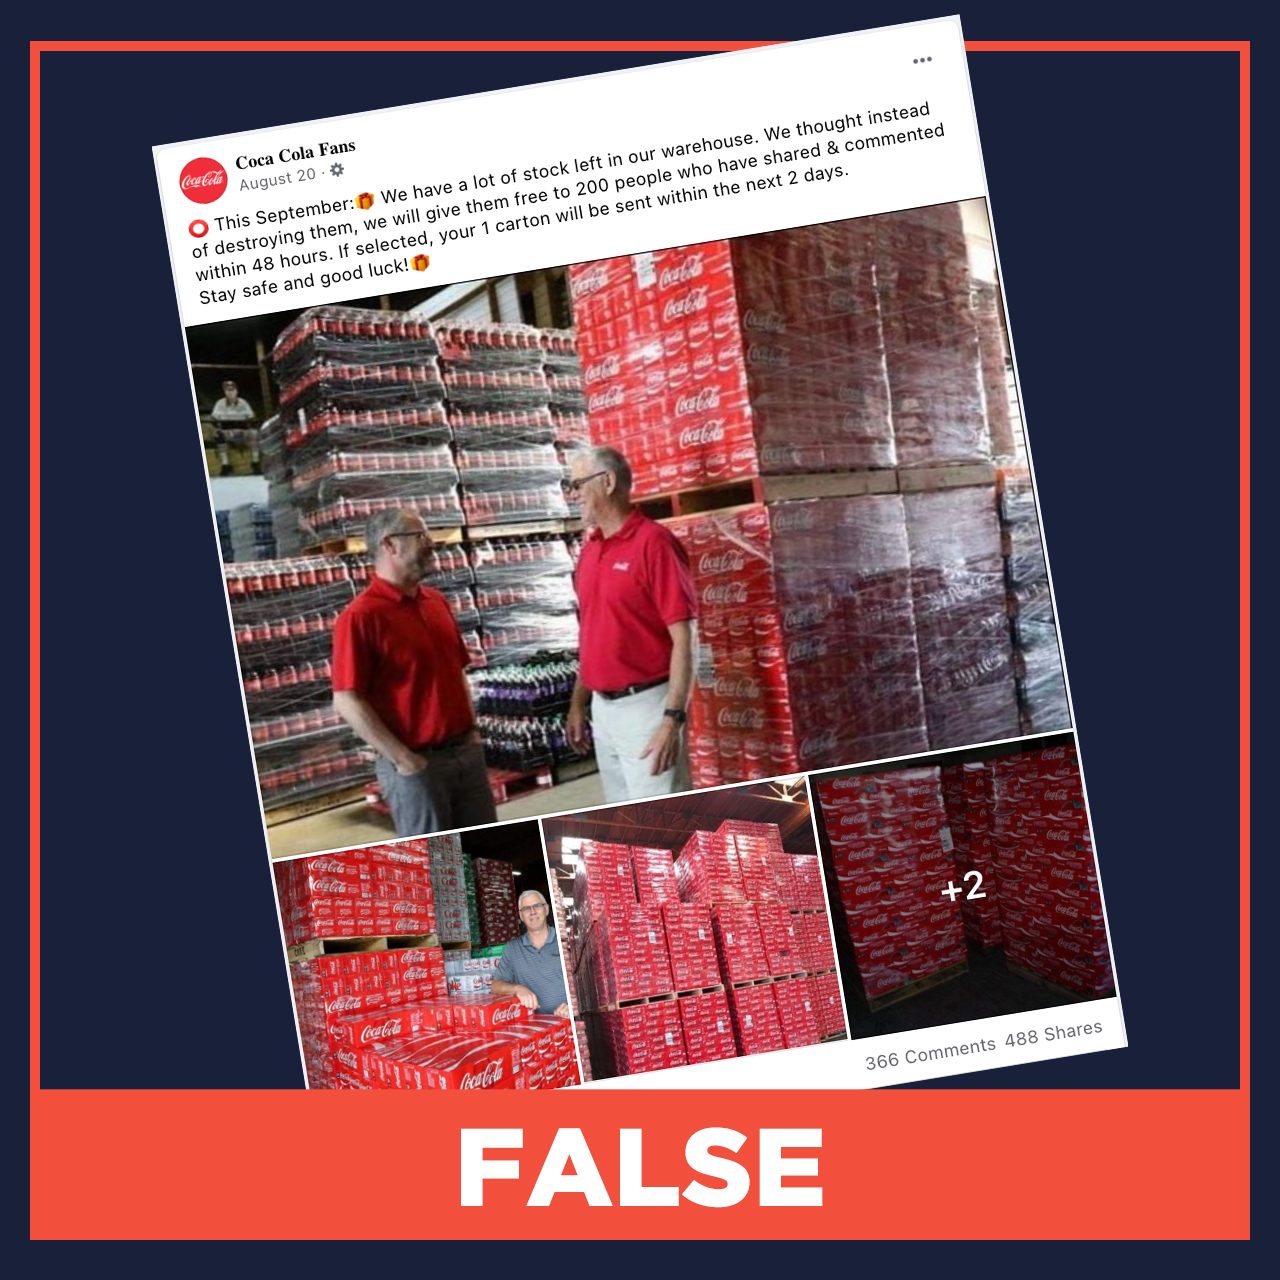 FALSE: Coca-Cola gives free carton of products to Facebook users